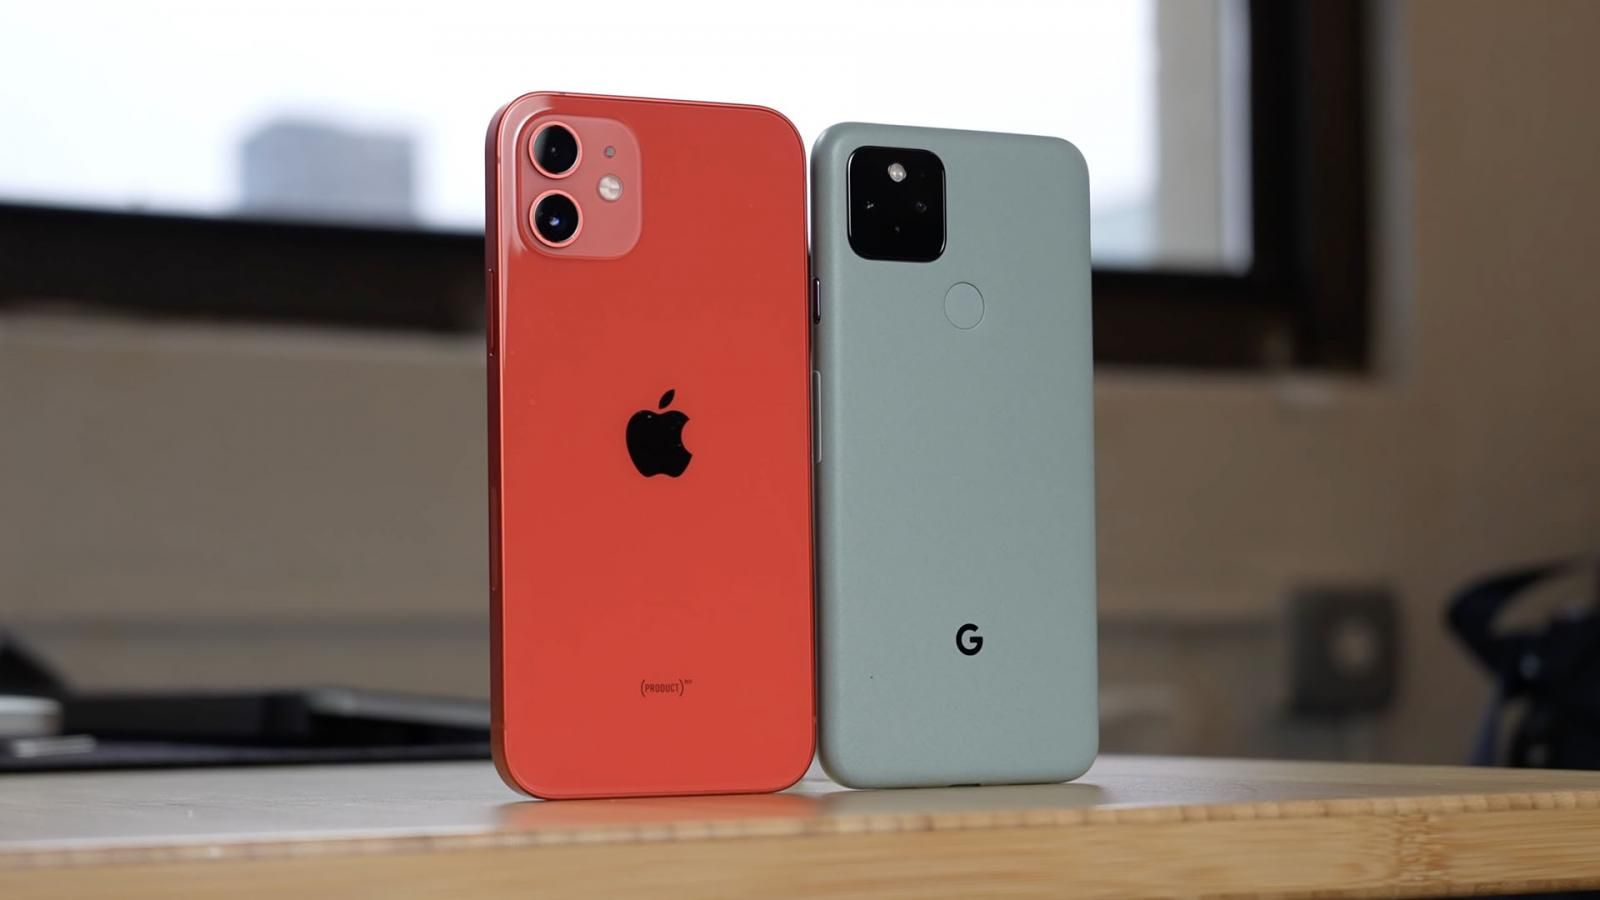 Pixel 5 and iPhone 12 cameras